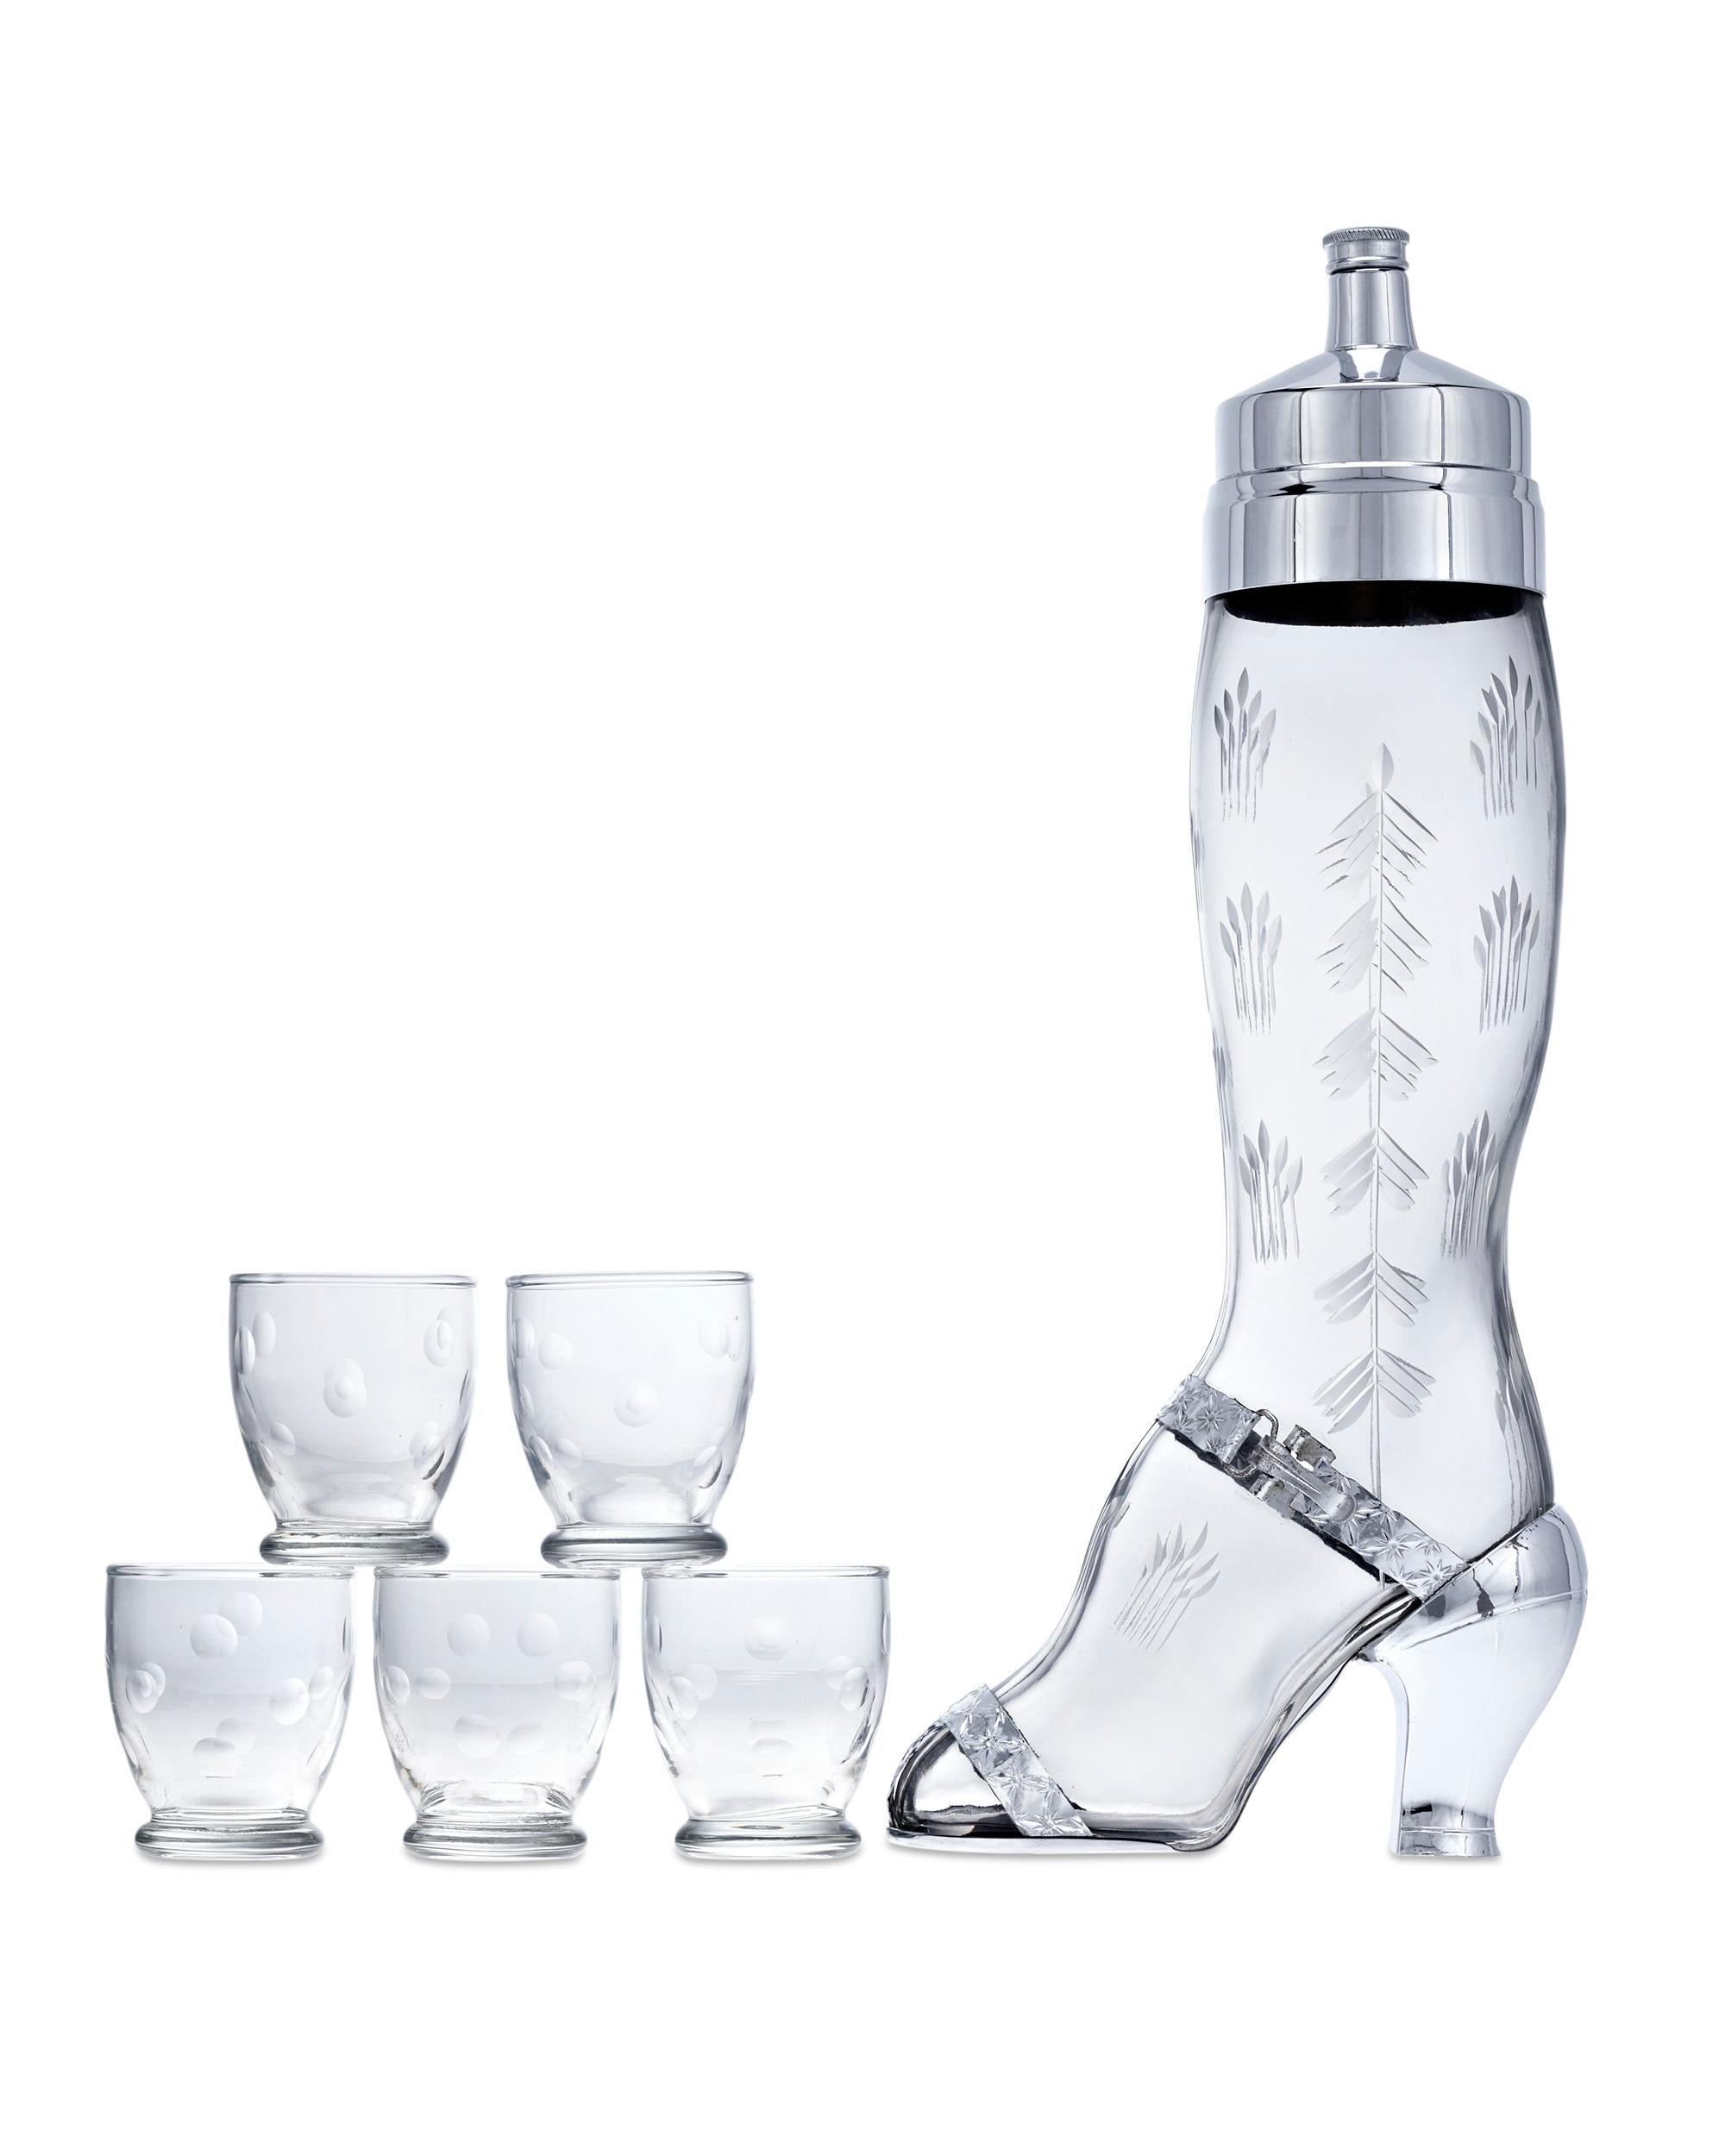 The form of a lady's leg entices one to imbibe with this etched glass cocktail set known as the “Shake a Leg” shaker. Made by the West Virginia Specialty Glass Co. with silverplate parts by Derby Shelton Silver Co. of Connecticut, the shaker is